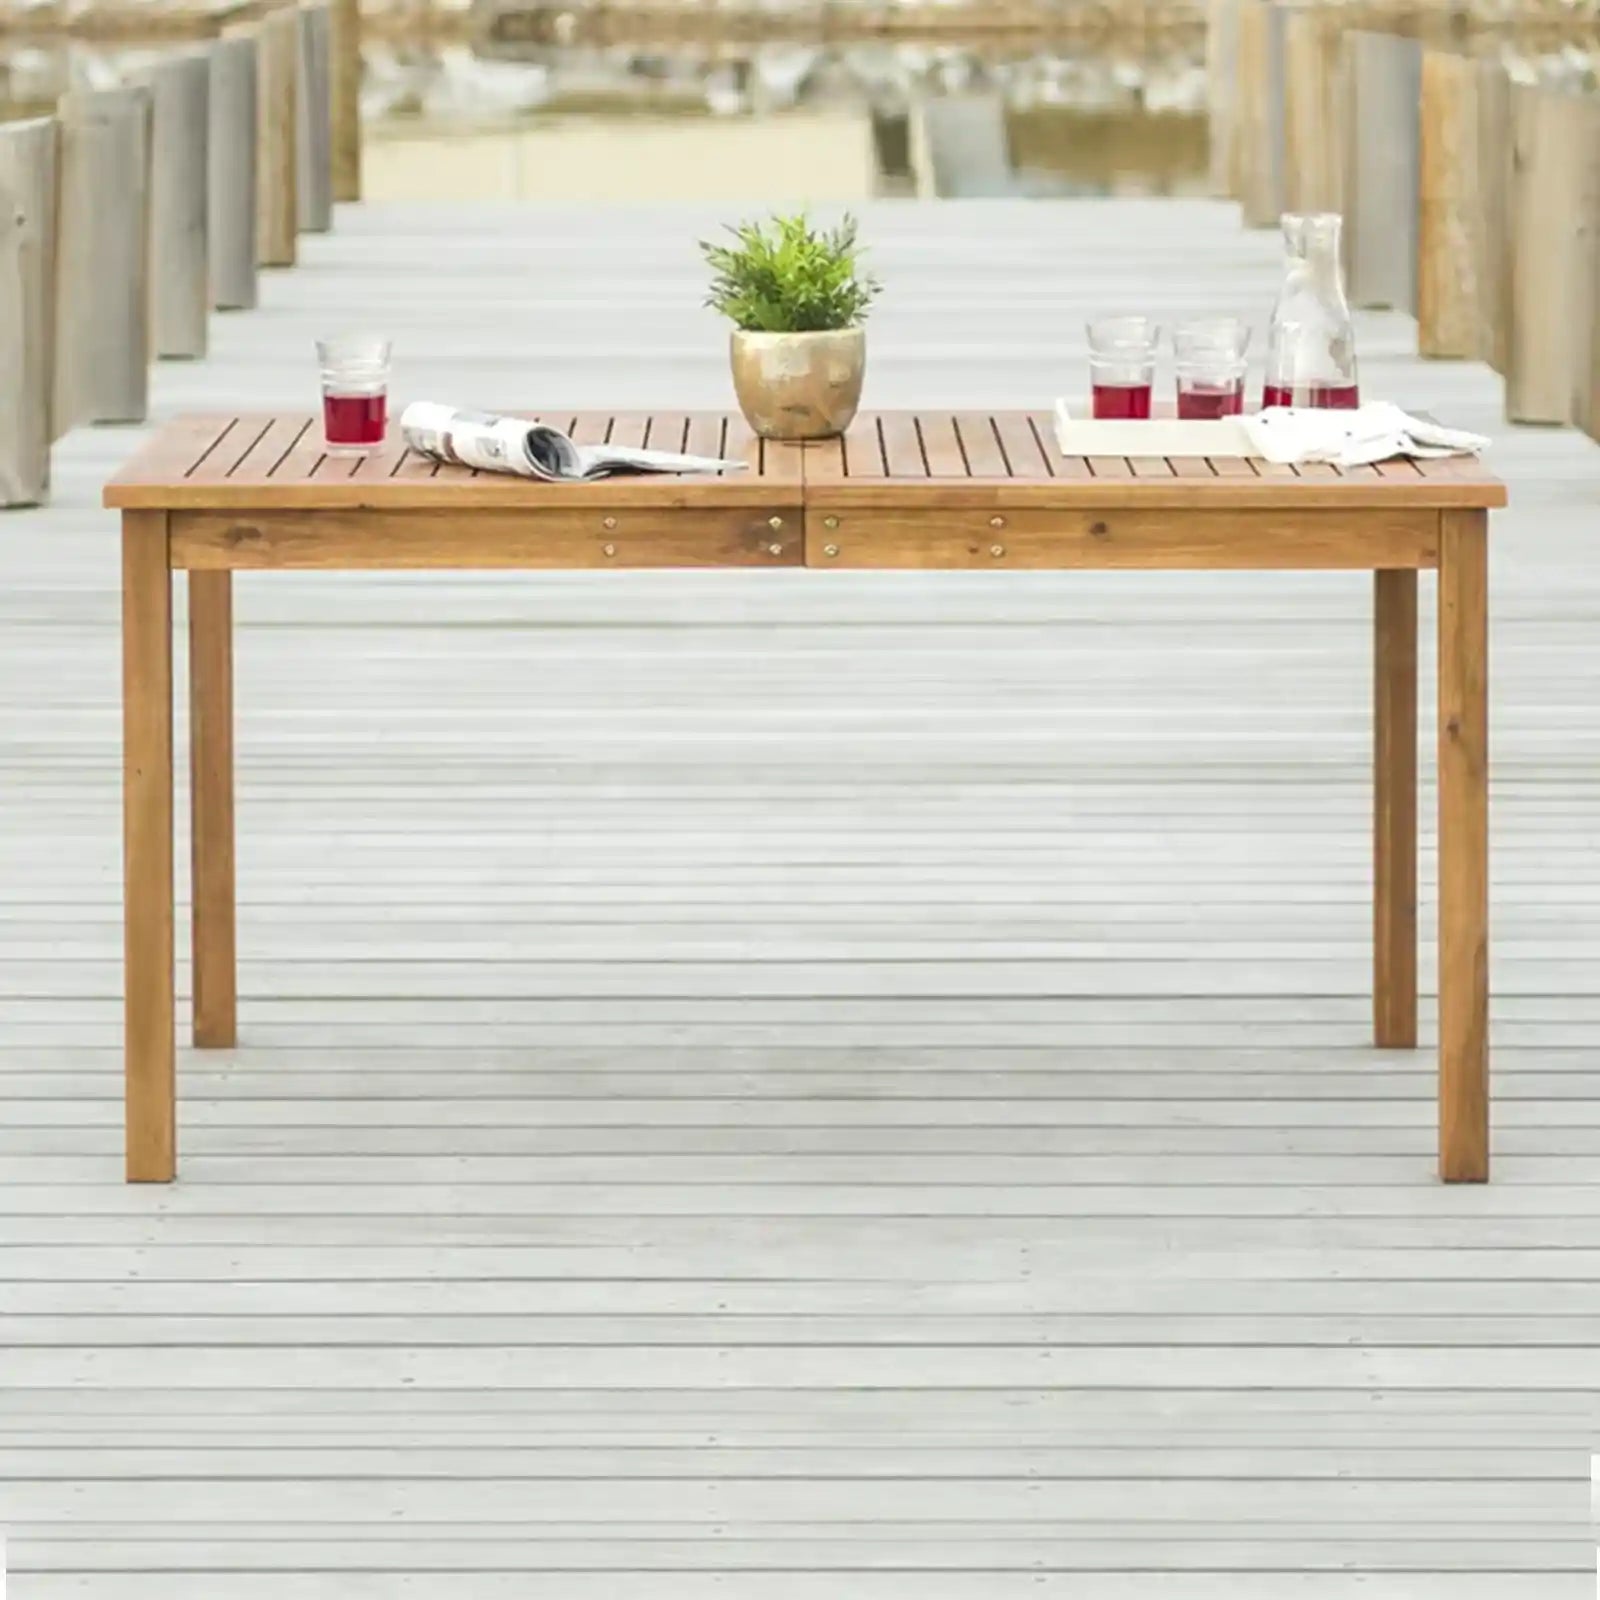 Wooden Outdoor Dining Table, Brown